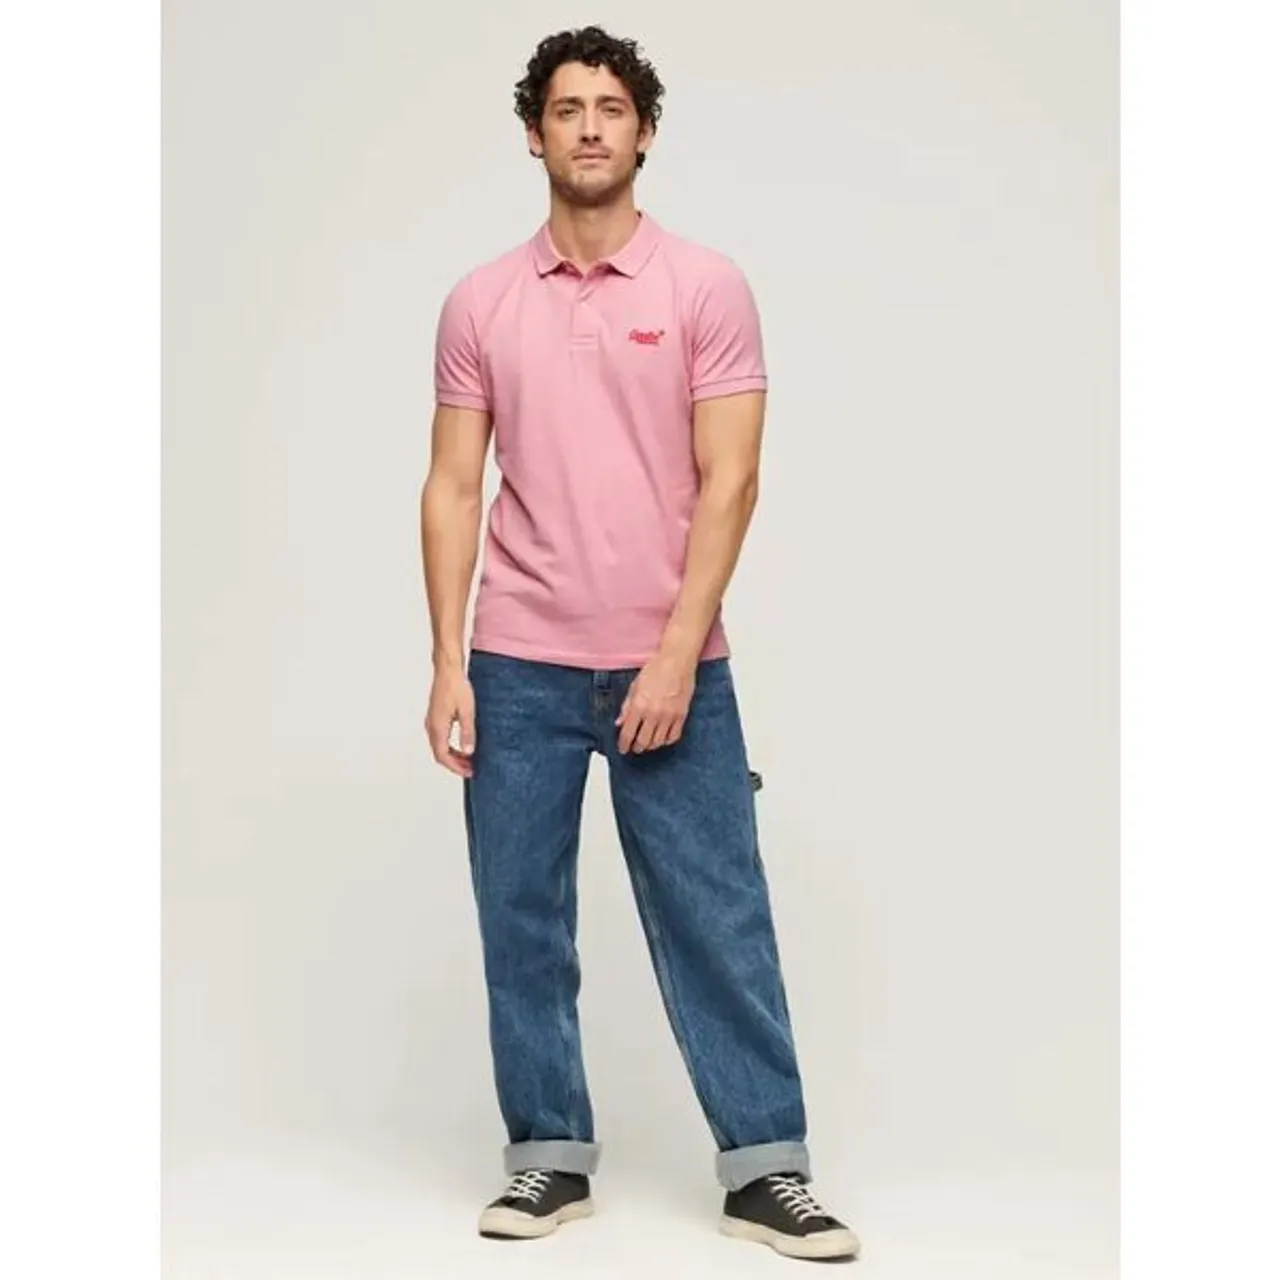 Superdry Classic Pique Polo Shirt - Light Pink Marl - Male